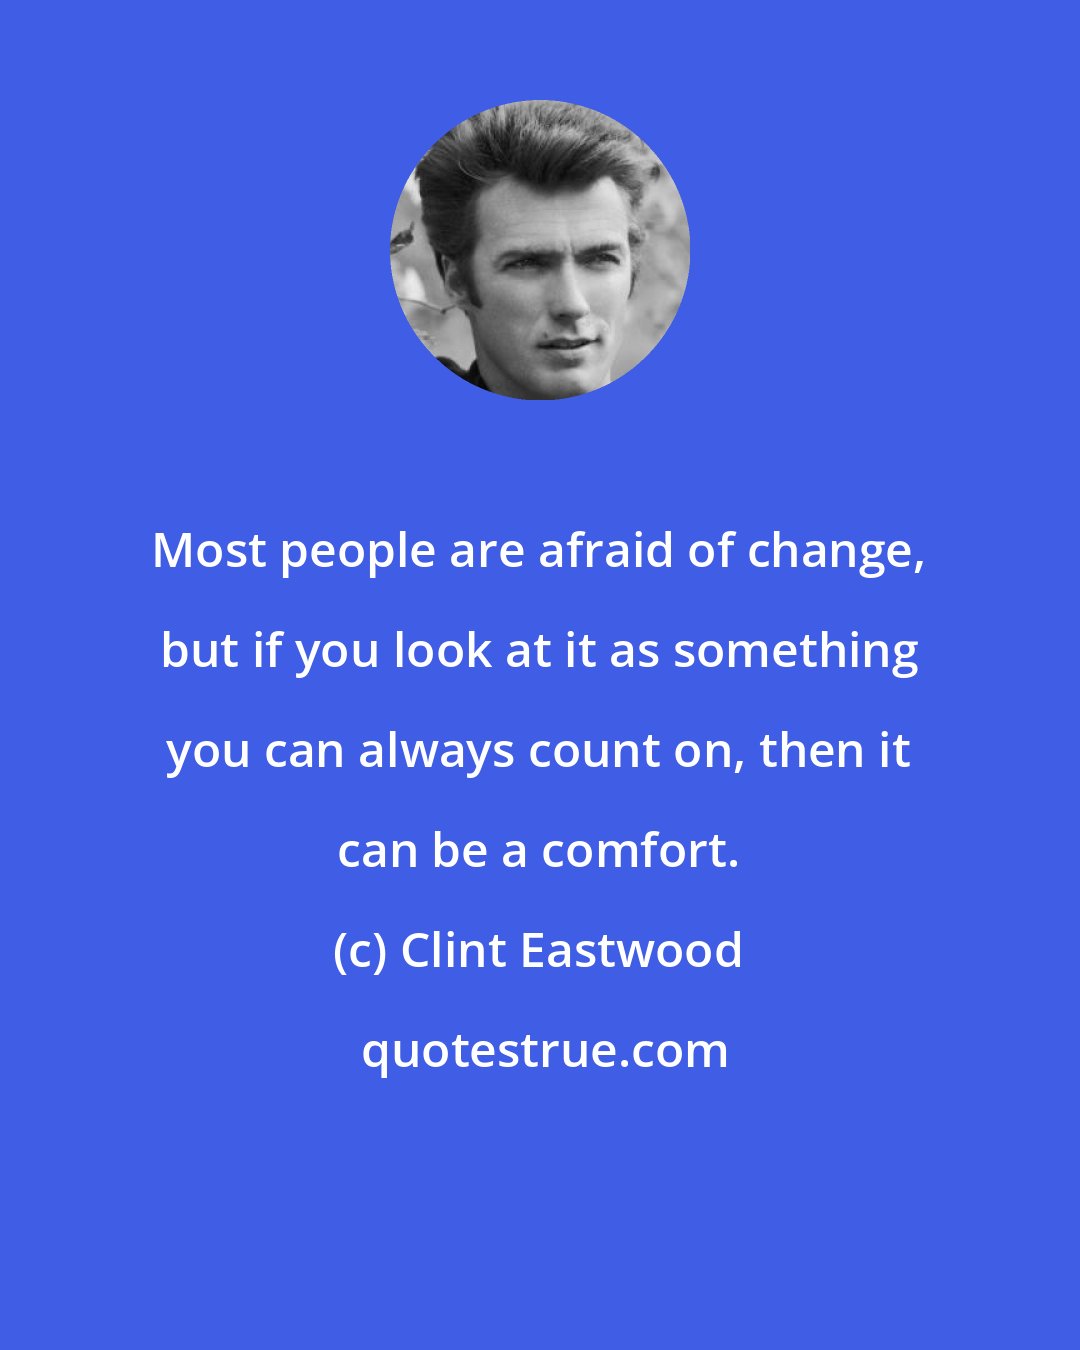 Clint Eastwood: Most people are afraid of change, but if you look at it as something you can always count on, then it can be a comfort.